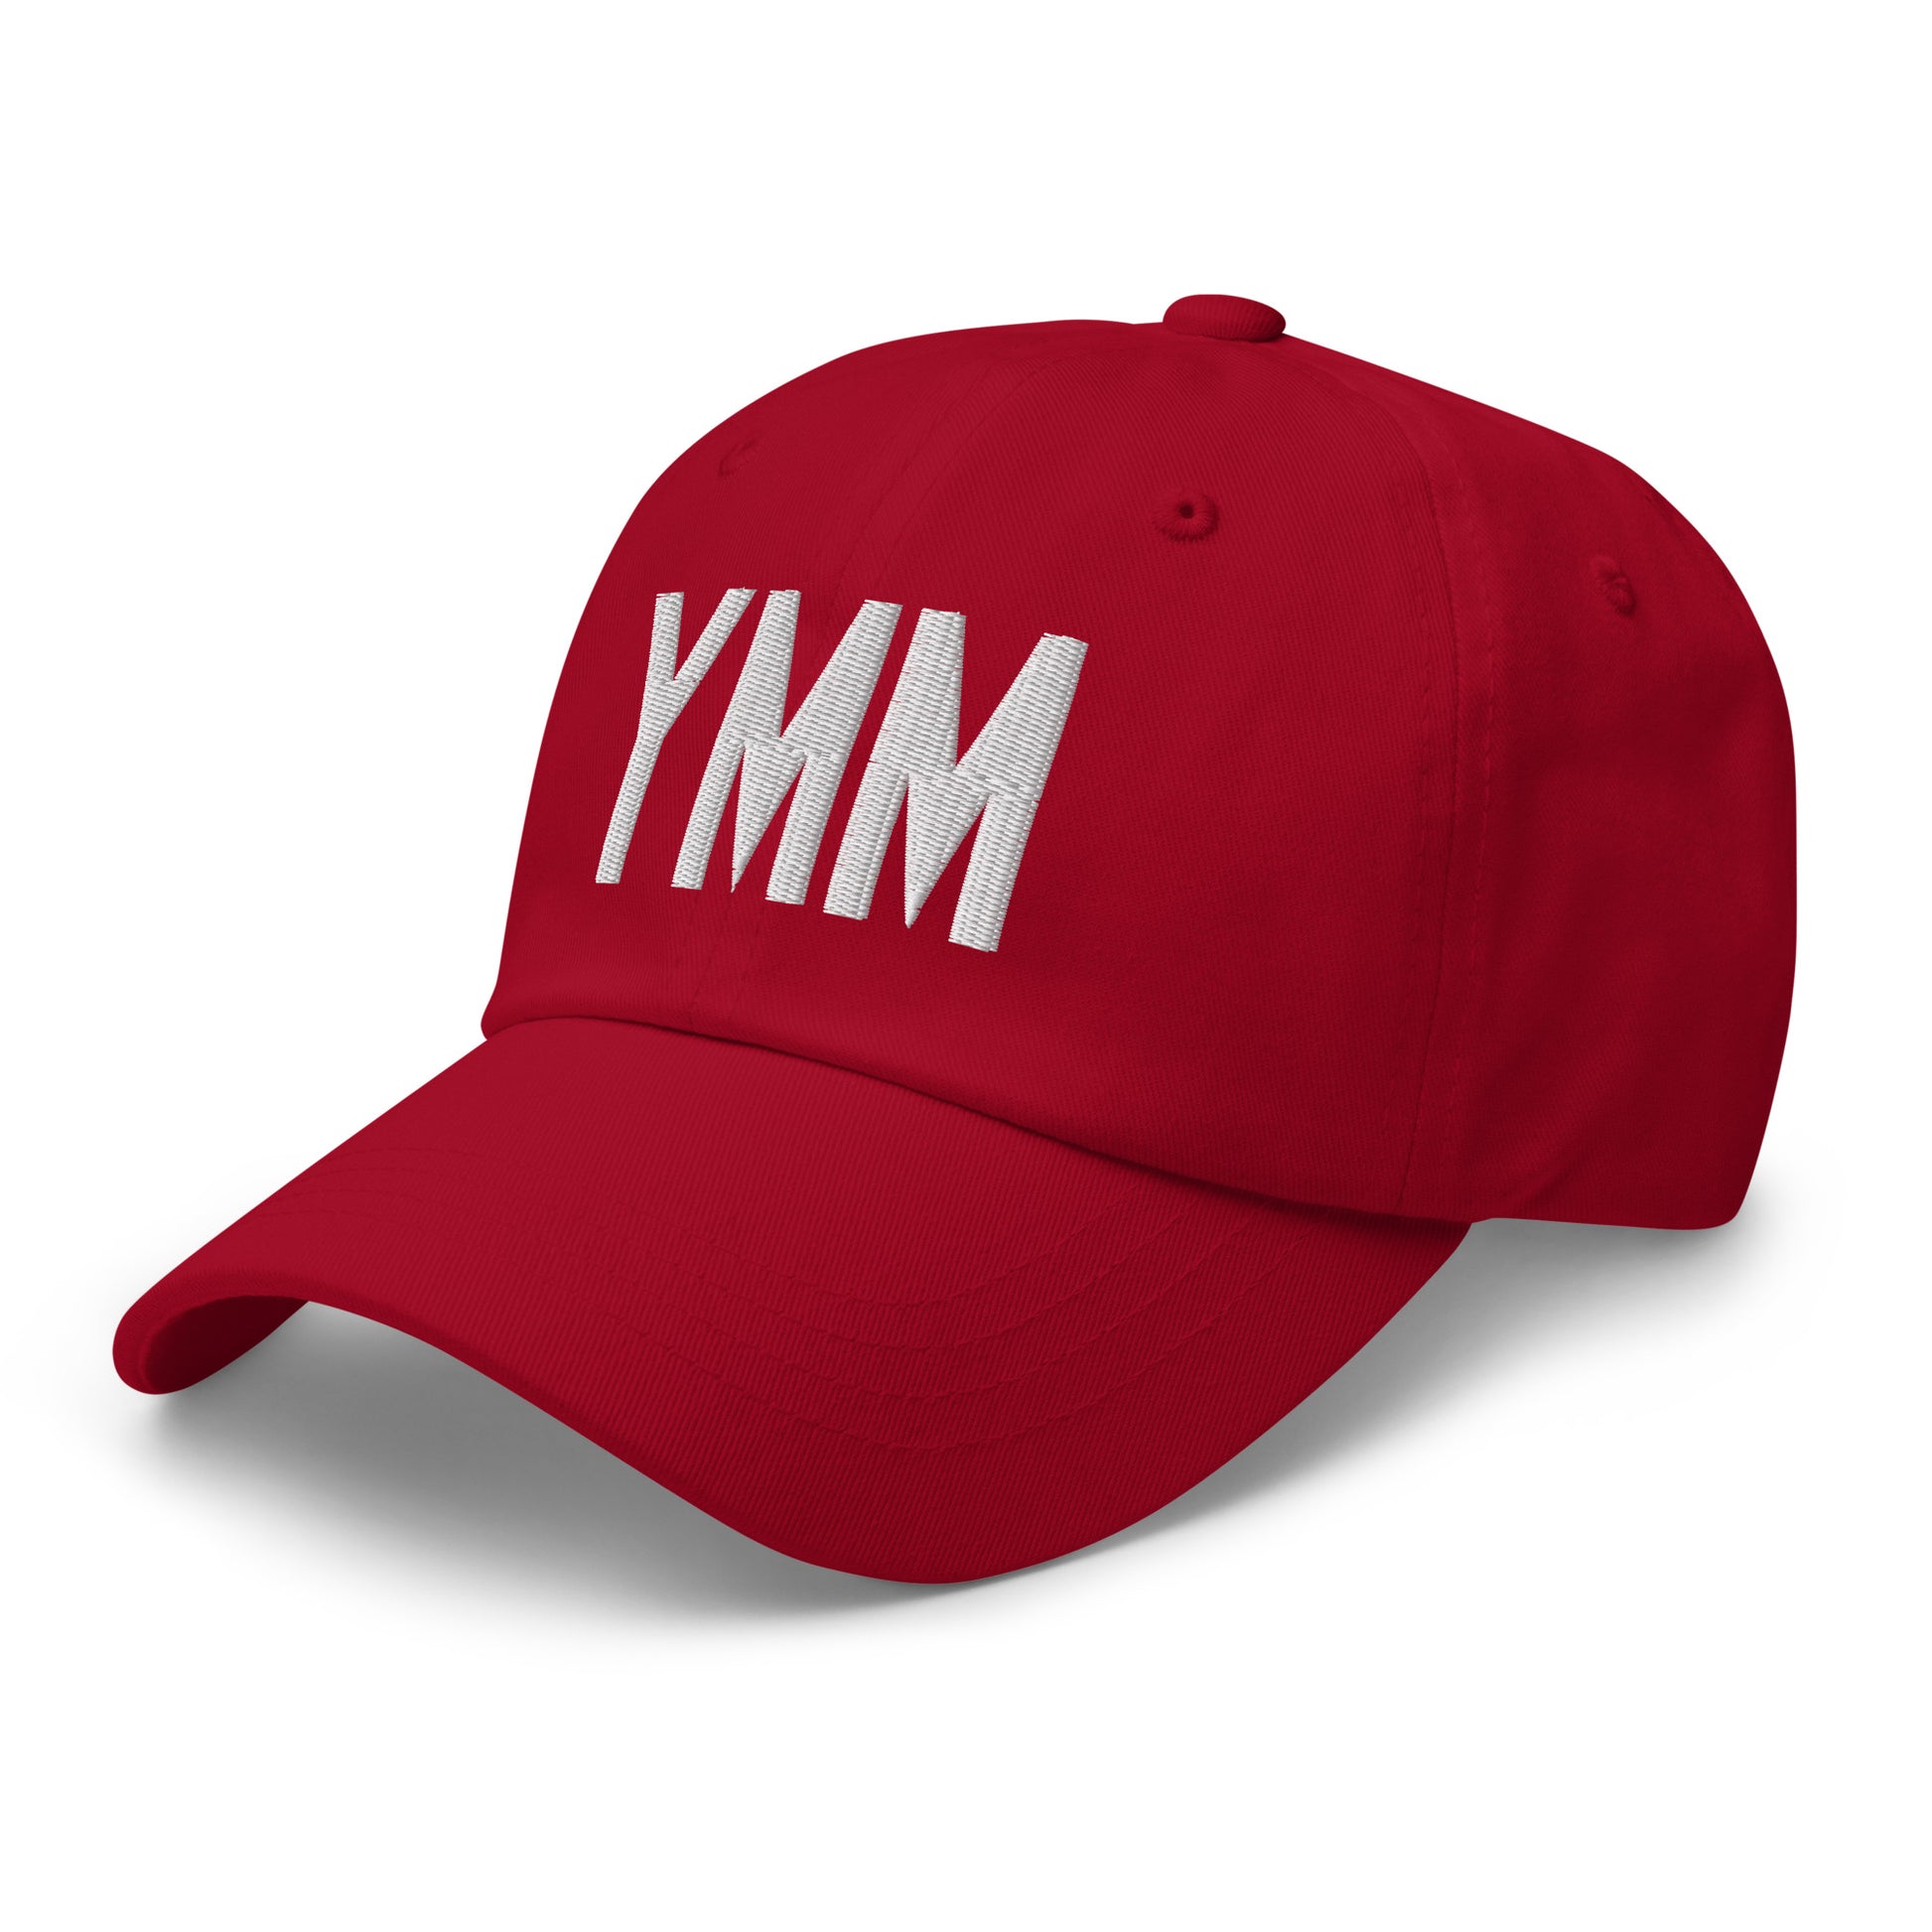 Airport Code Baseball Cap - White • YMM Fort McMurray • YHM Designs - Image 21